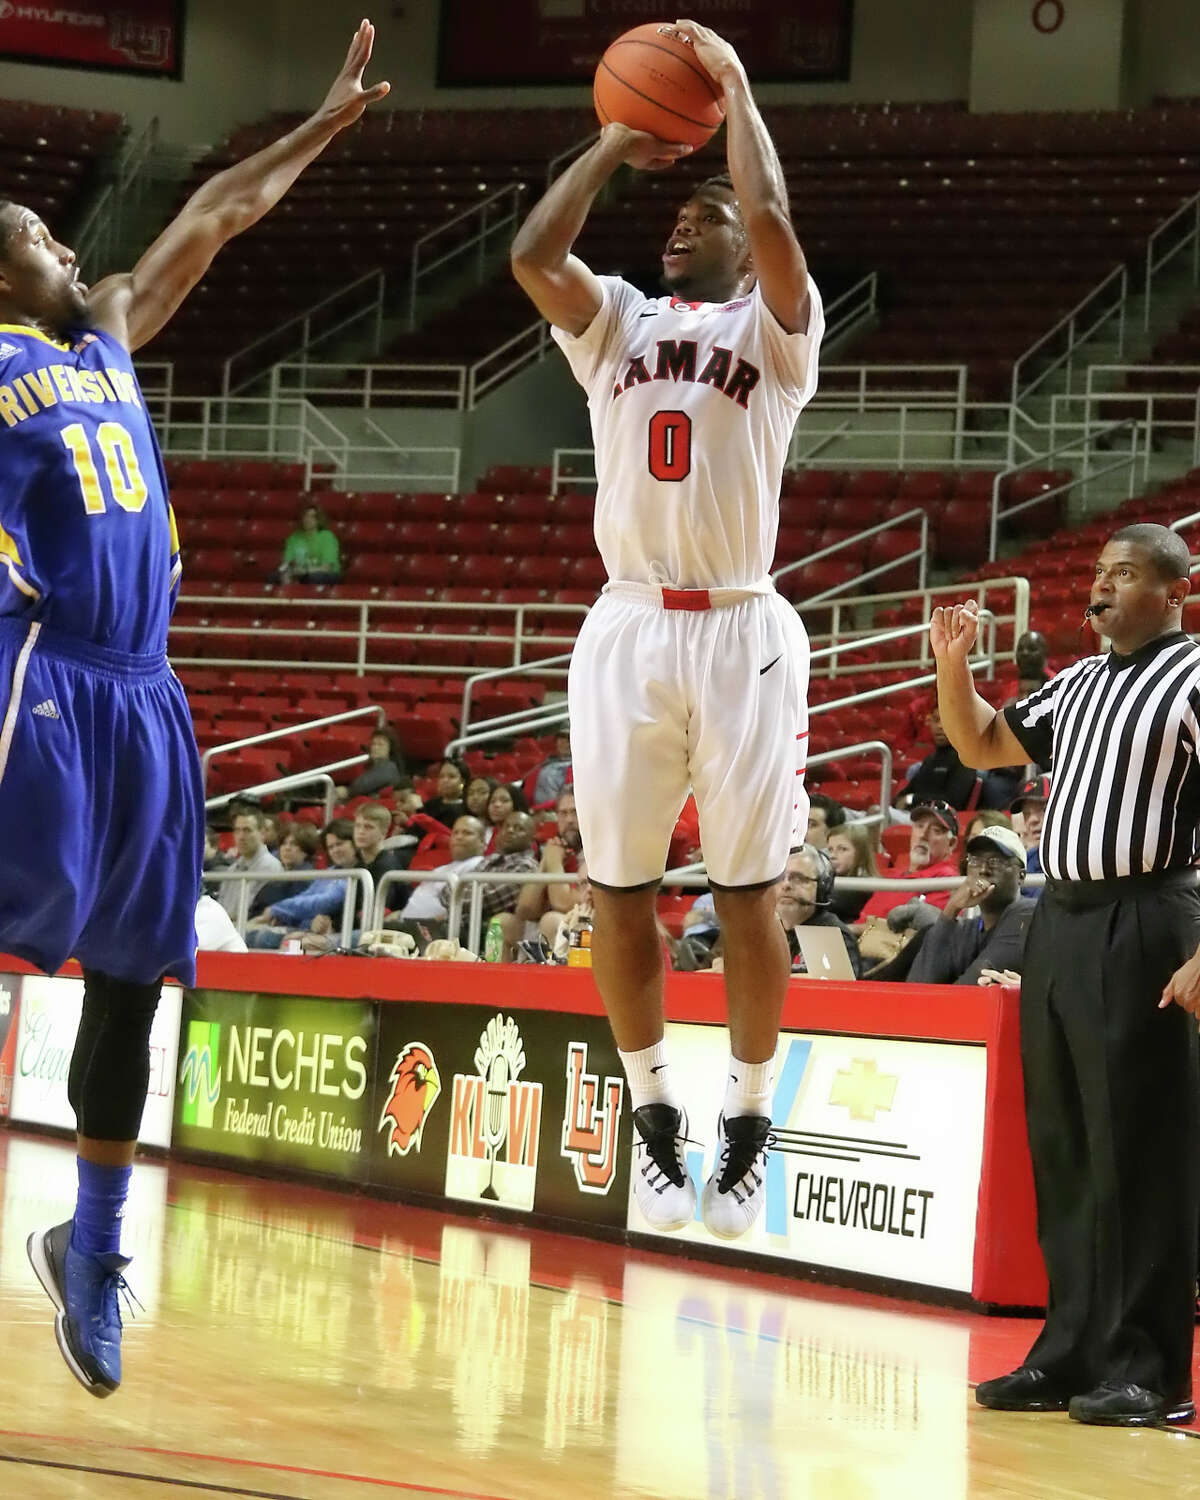 Kevin Booze takes a shot during the game between the Lamar Cardinals and University of California Riverside Highlanders at the Montagne Center Sunday, November 29, 2015 - photo provided by Kyle Ezell